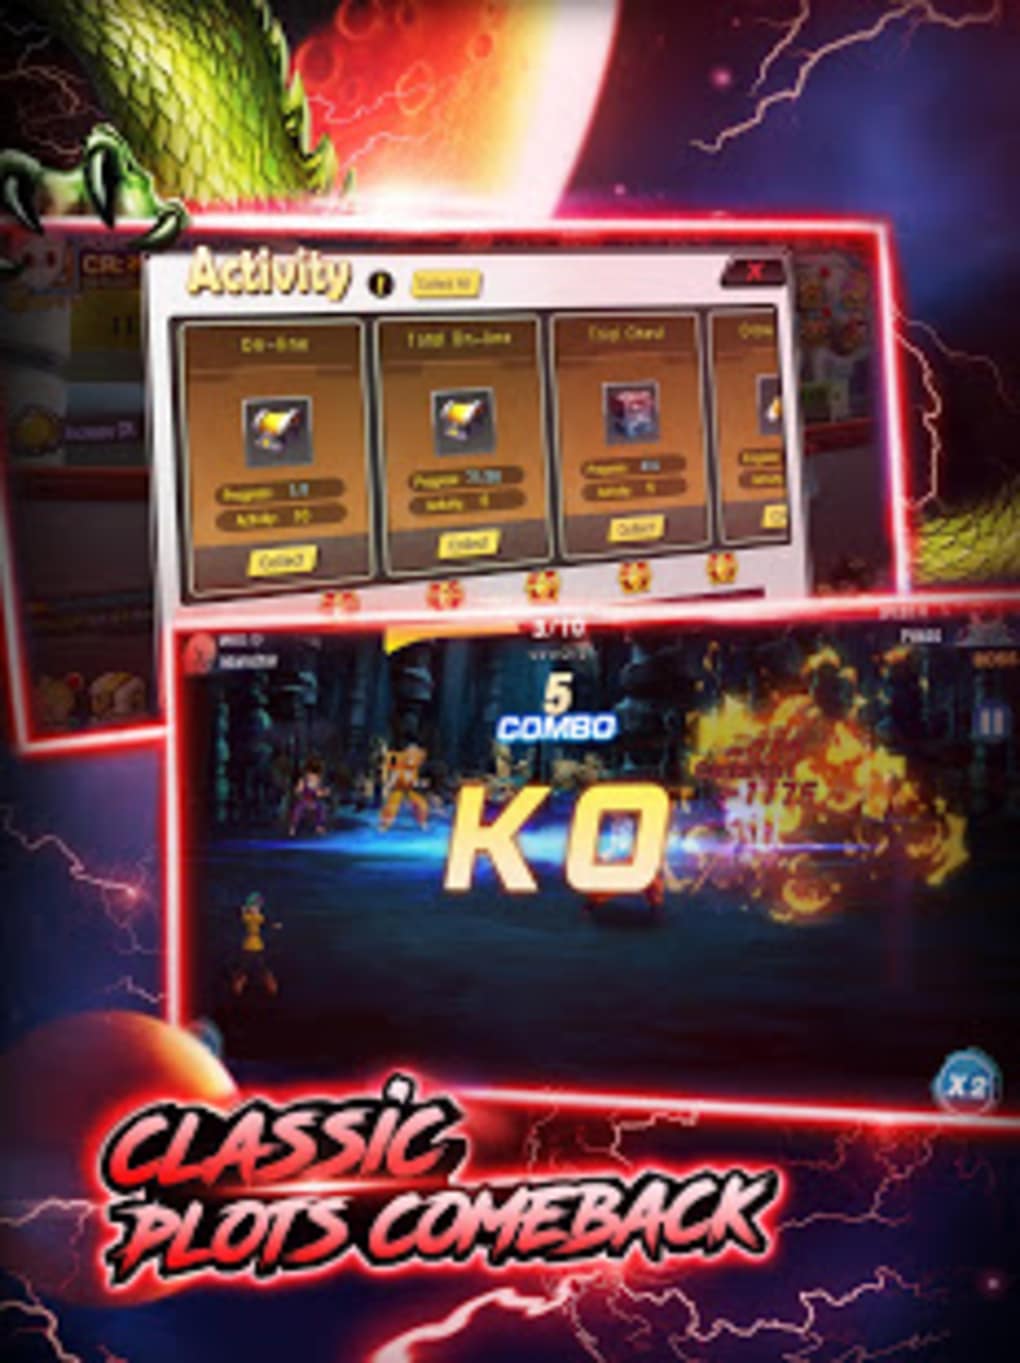 FiGHTER KING Z (Starry Instrument Dery) APK for Android - Free Download